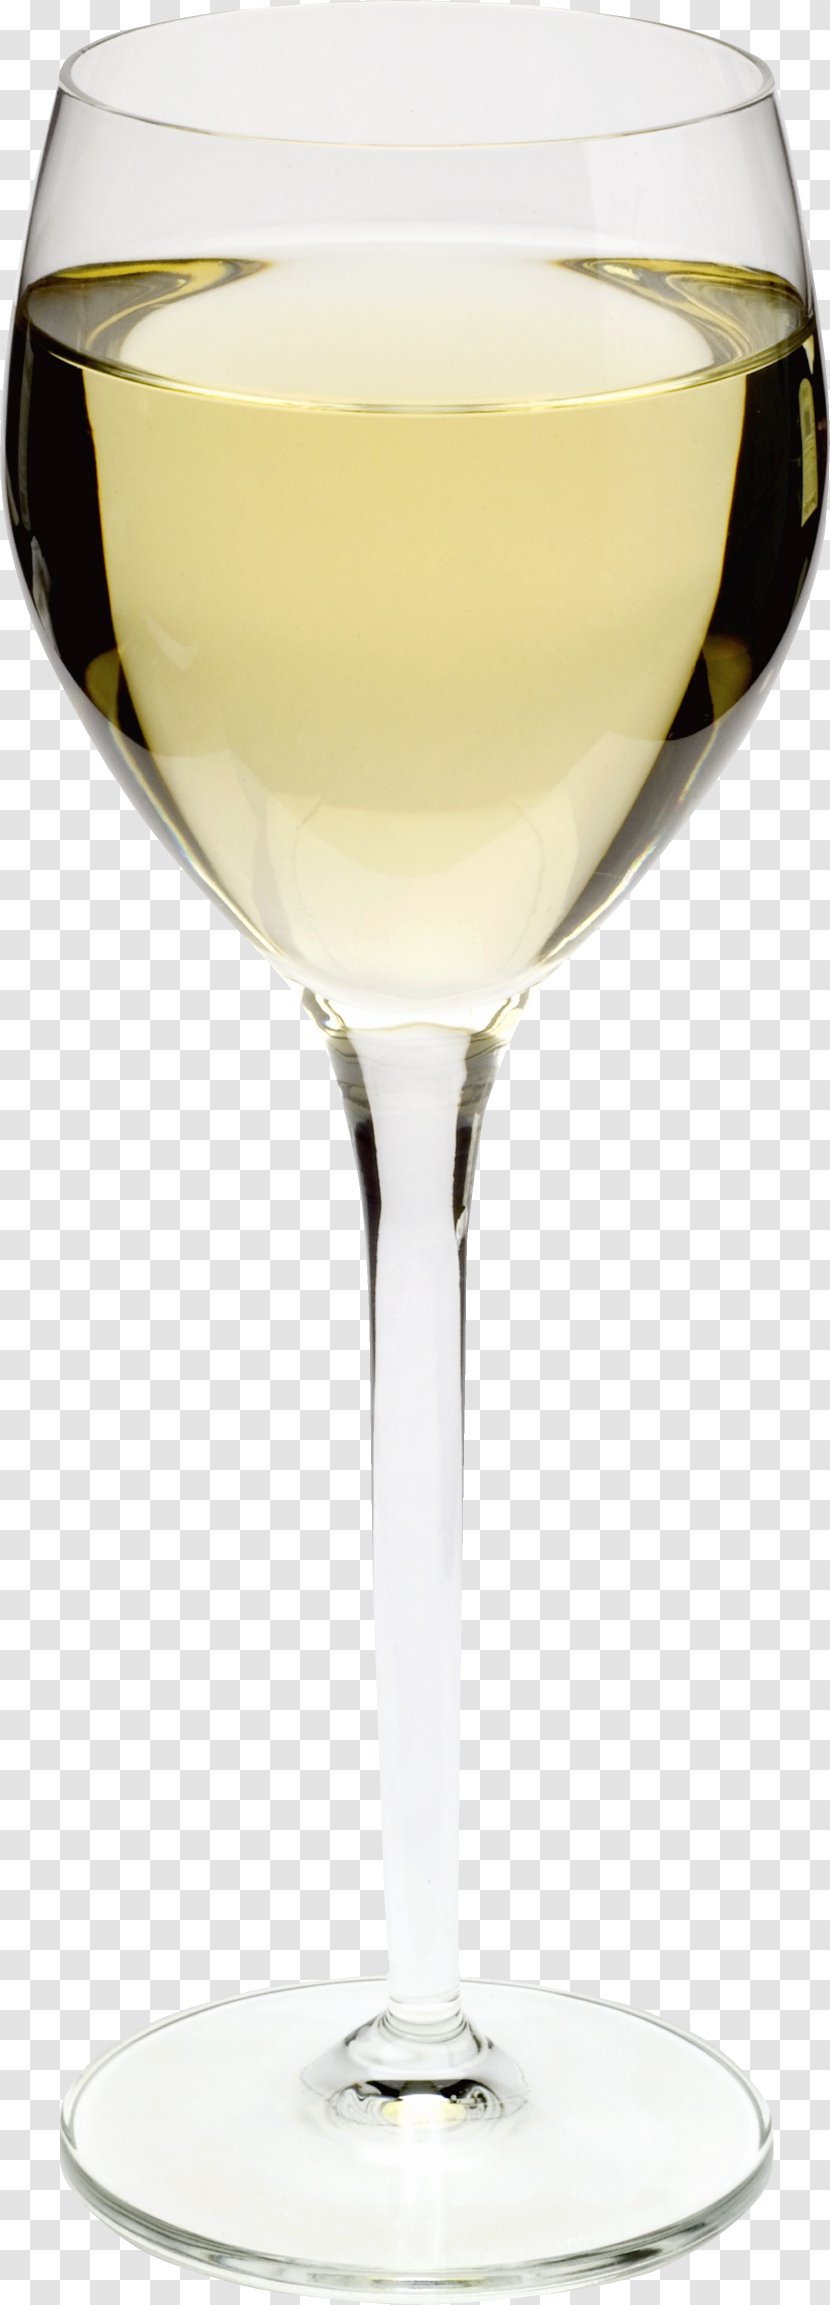 Wine Cocktail Glass Champagne White Transparent PNG